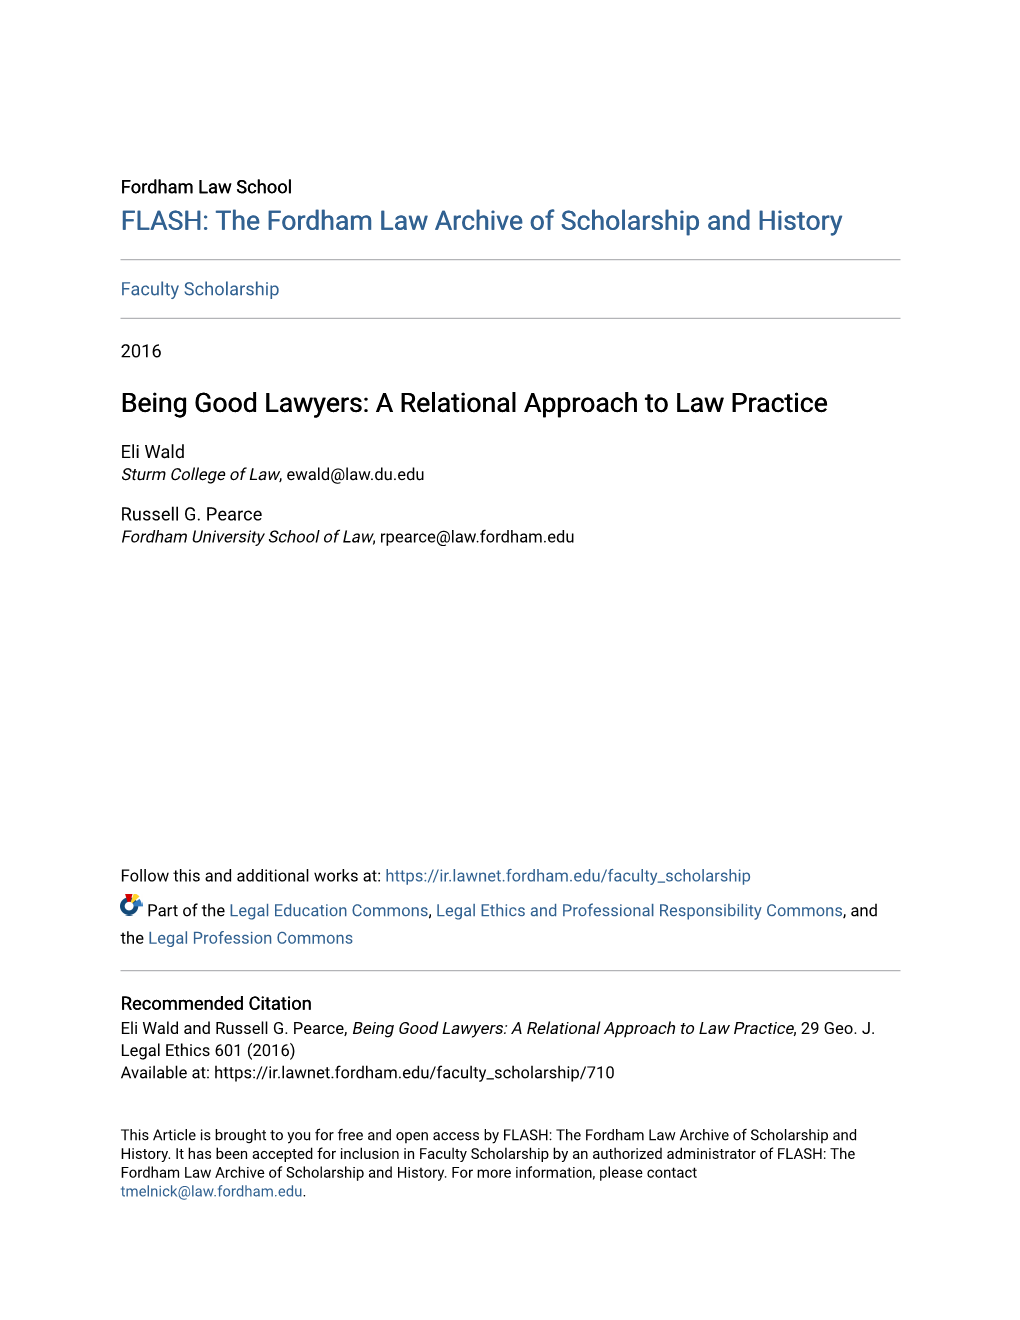 A Relational Approach to Law Practice